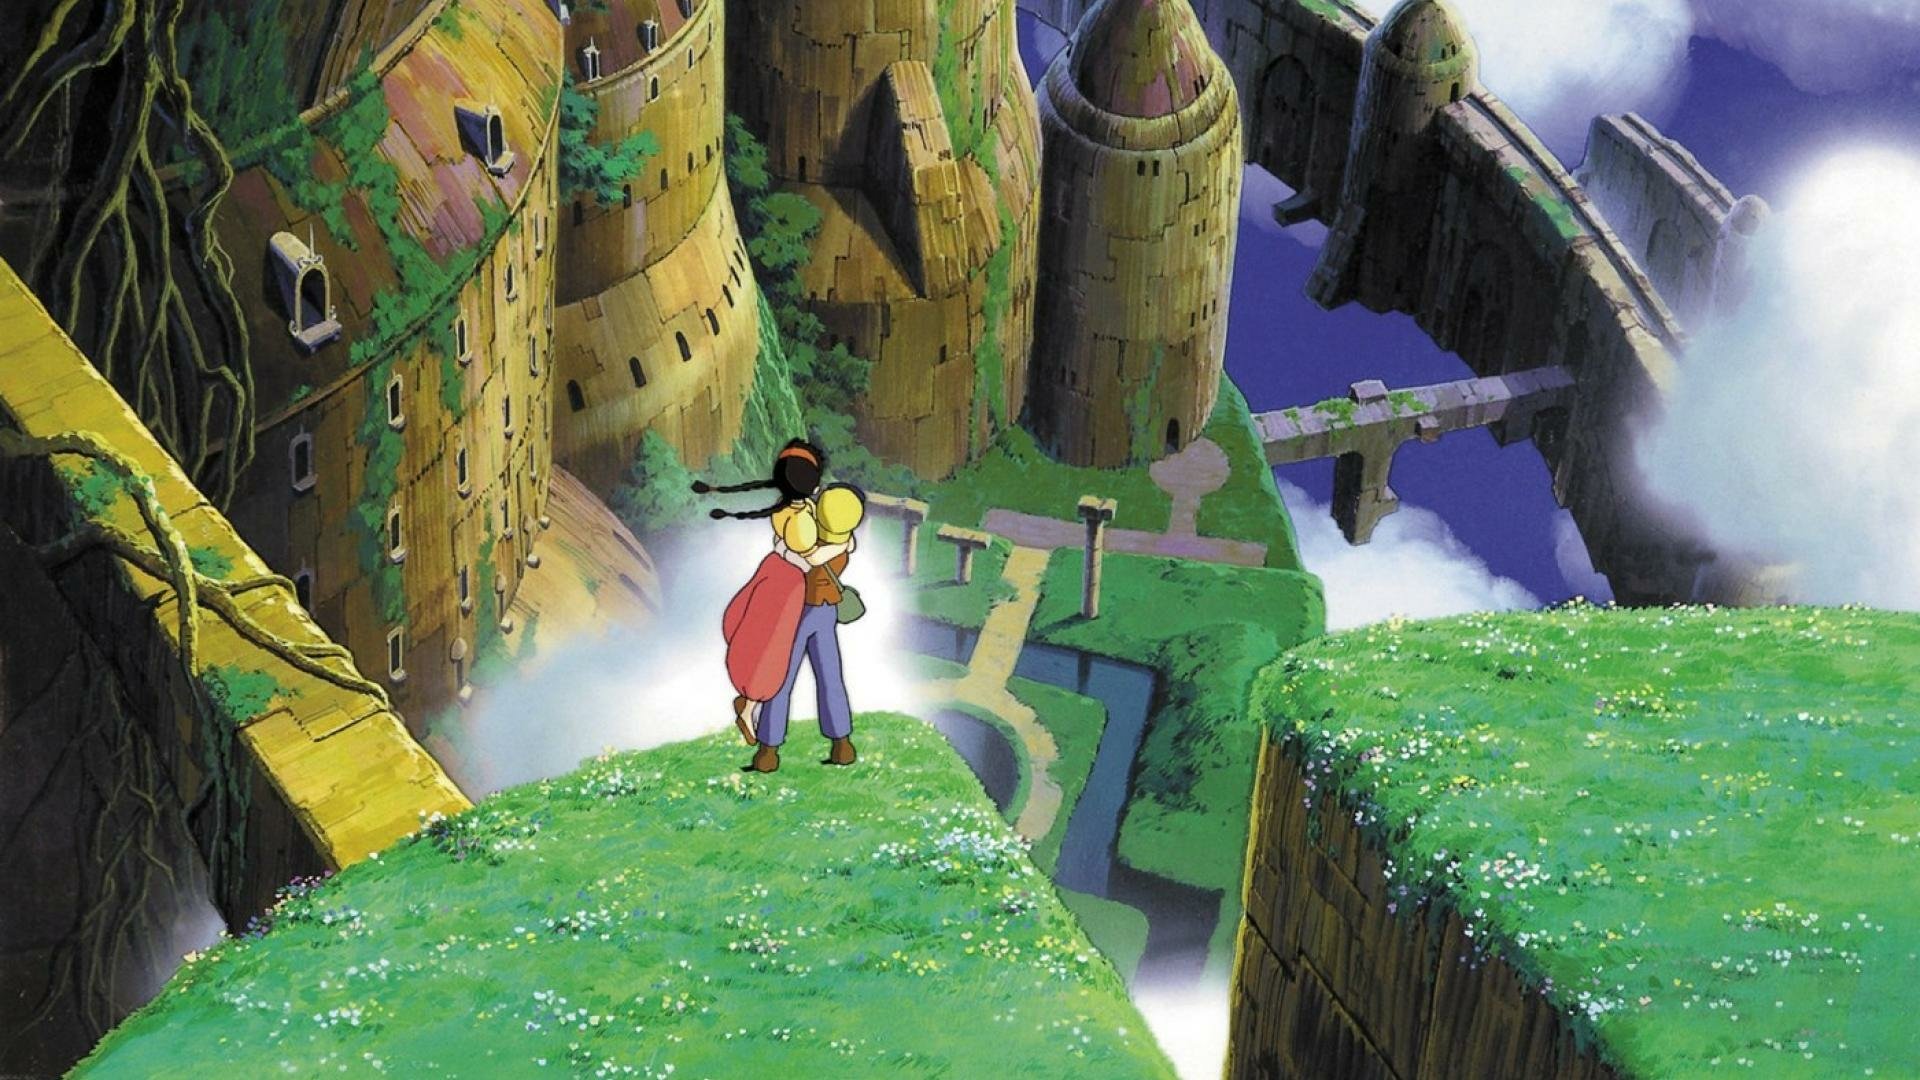 castle in the sky download